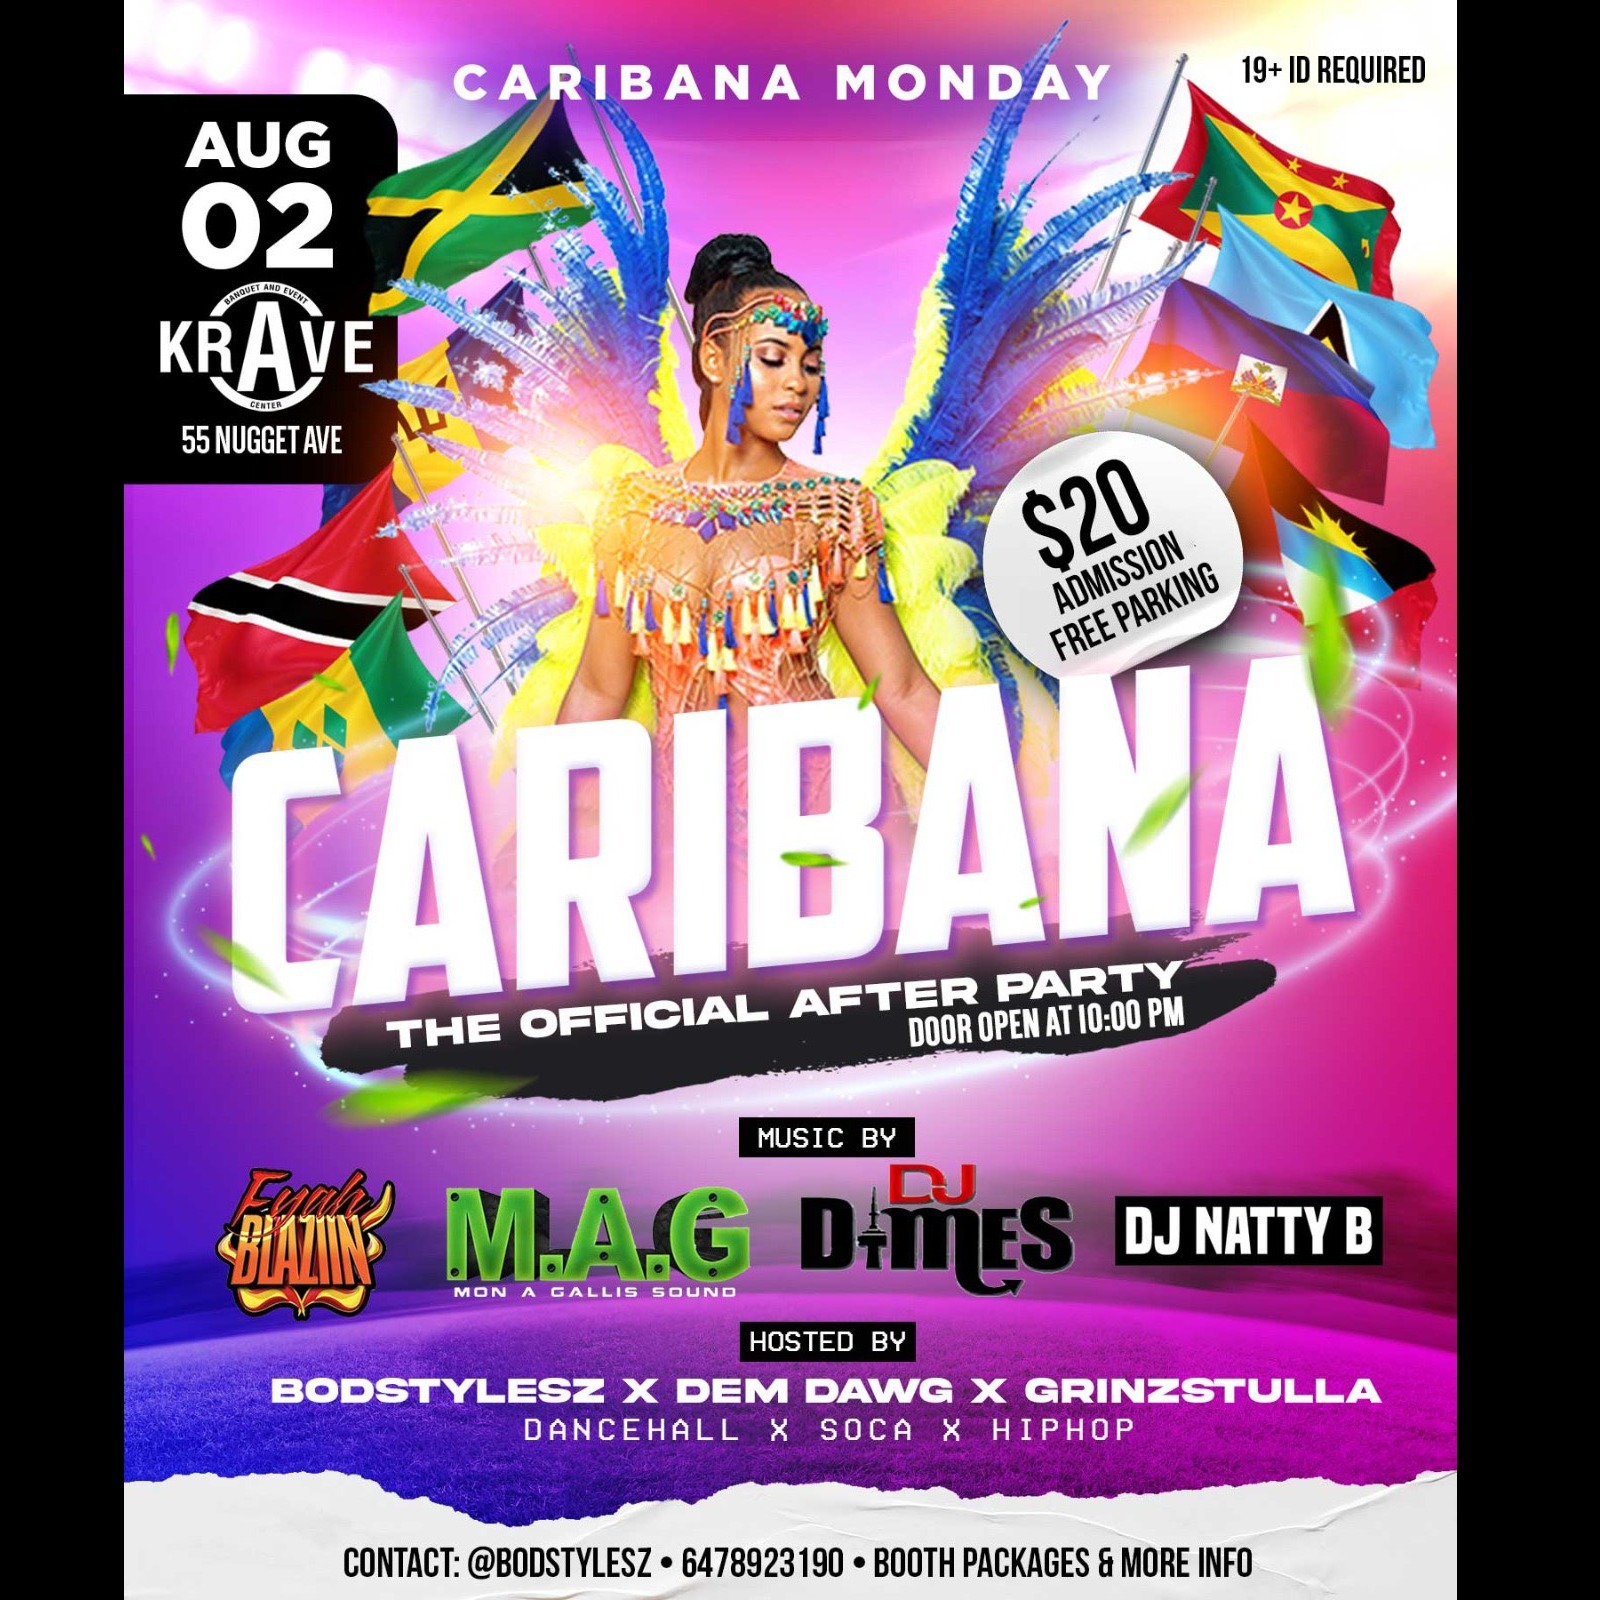 CARIBANA (THE OFFICIAL AFTER PARTY)